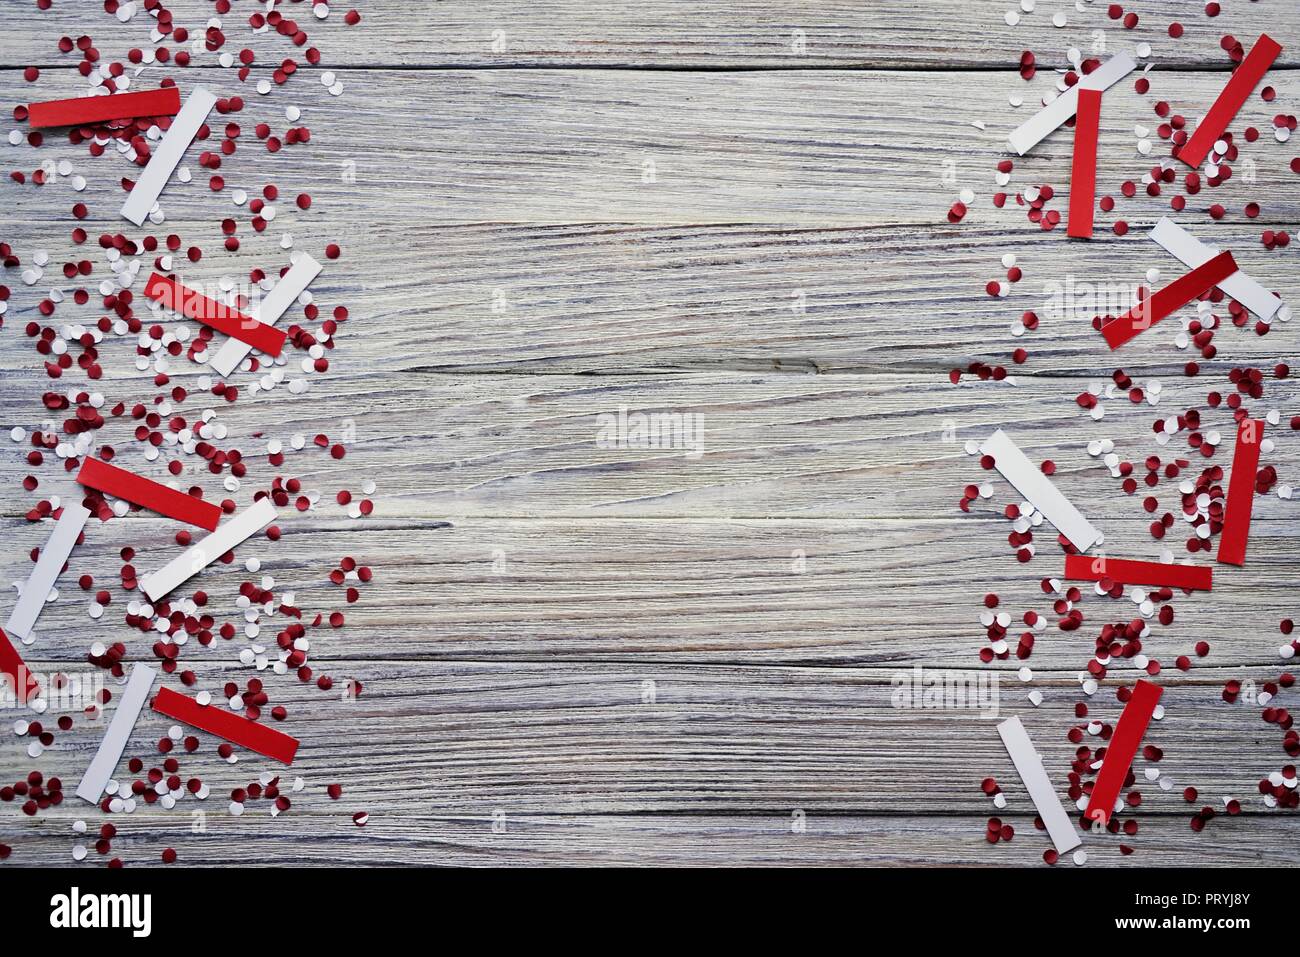 concept-independence day of Turkey, national paper flags of the state of Turkey with white red confetti on a white brushed wooden background, horizont Stock Photo